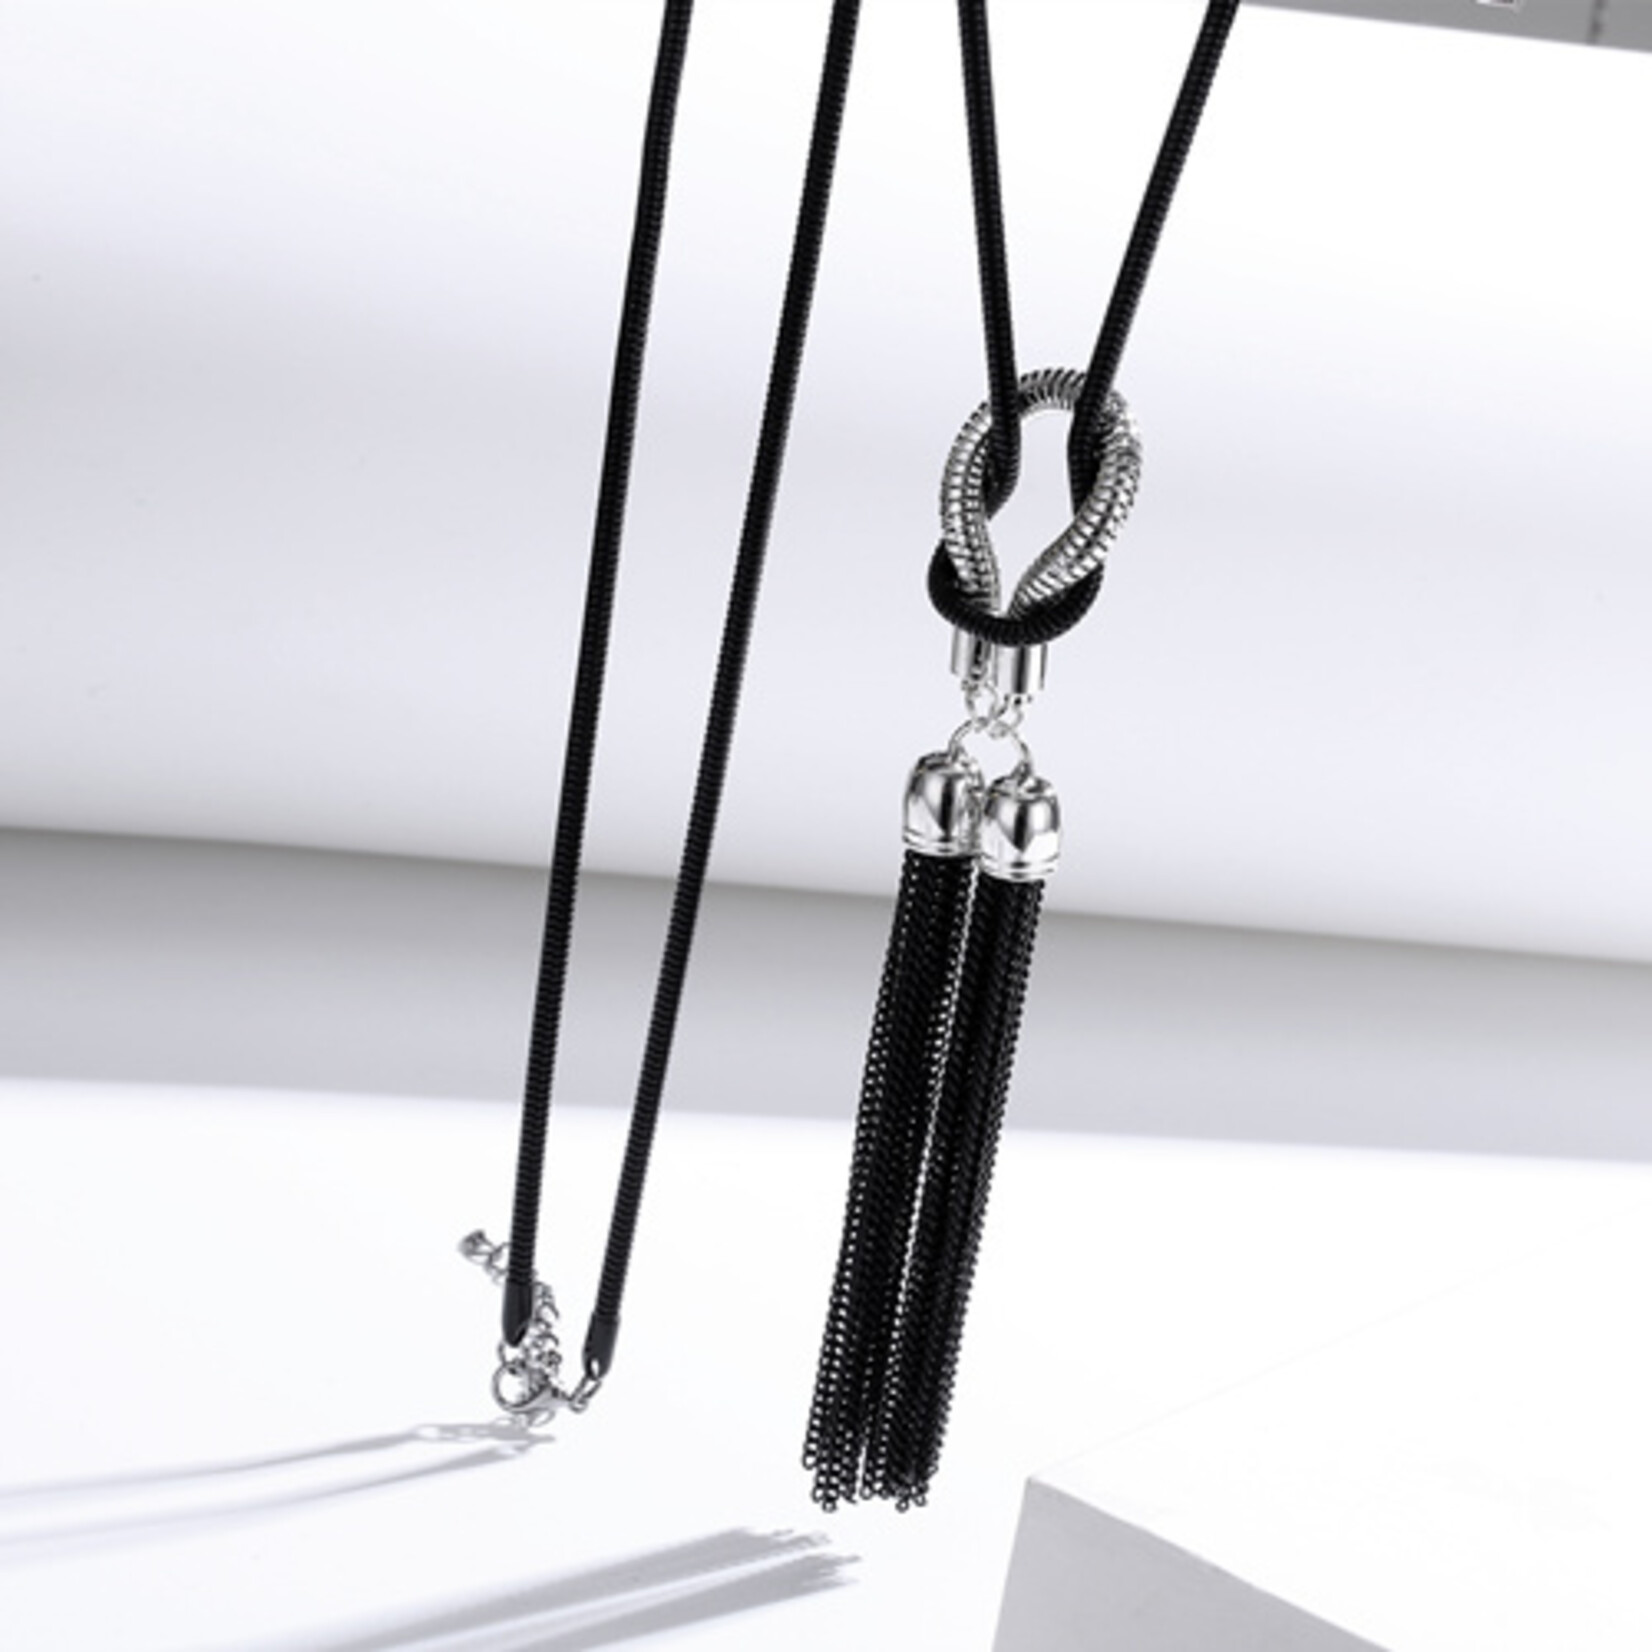 fashion jewelry Fashion jewelry rope style chain with dangly chains, neck;ace